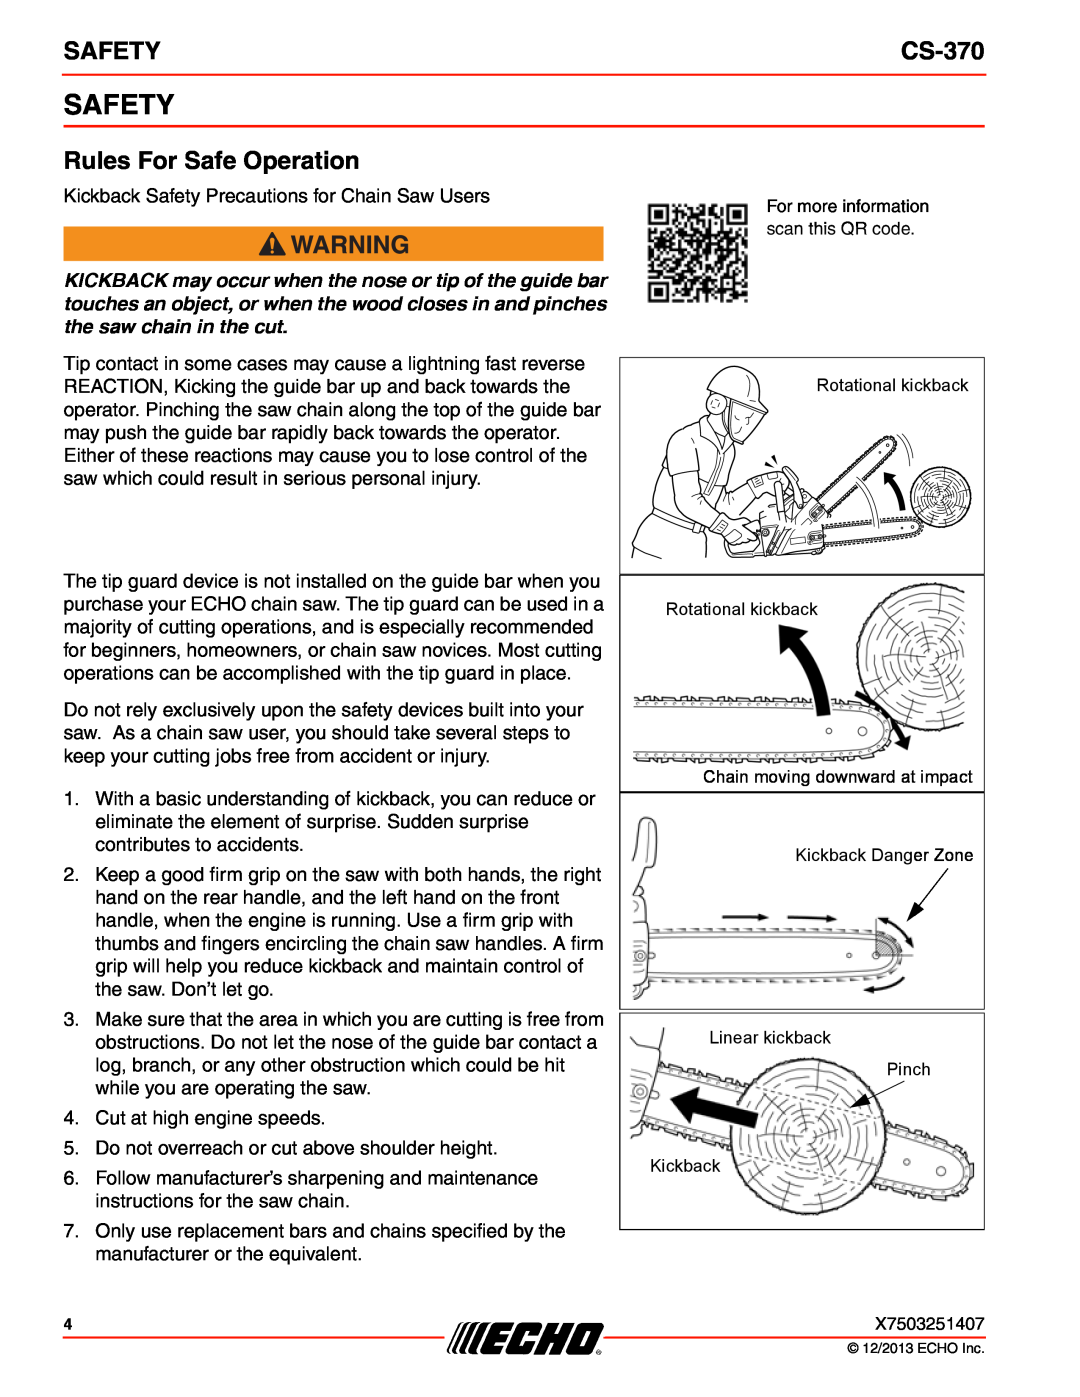 Echo CS-370 instruction manual Safety, Rules For Safe Operation 